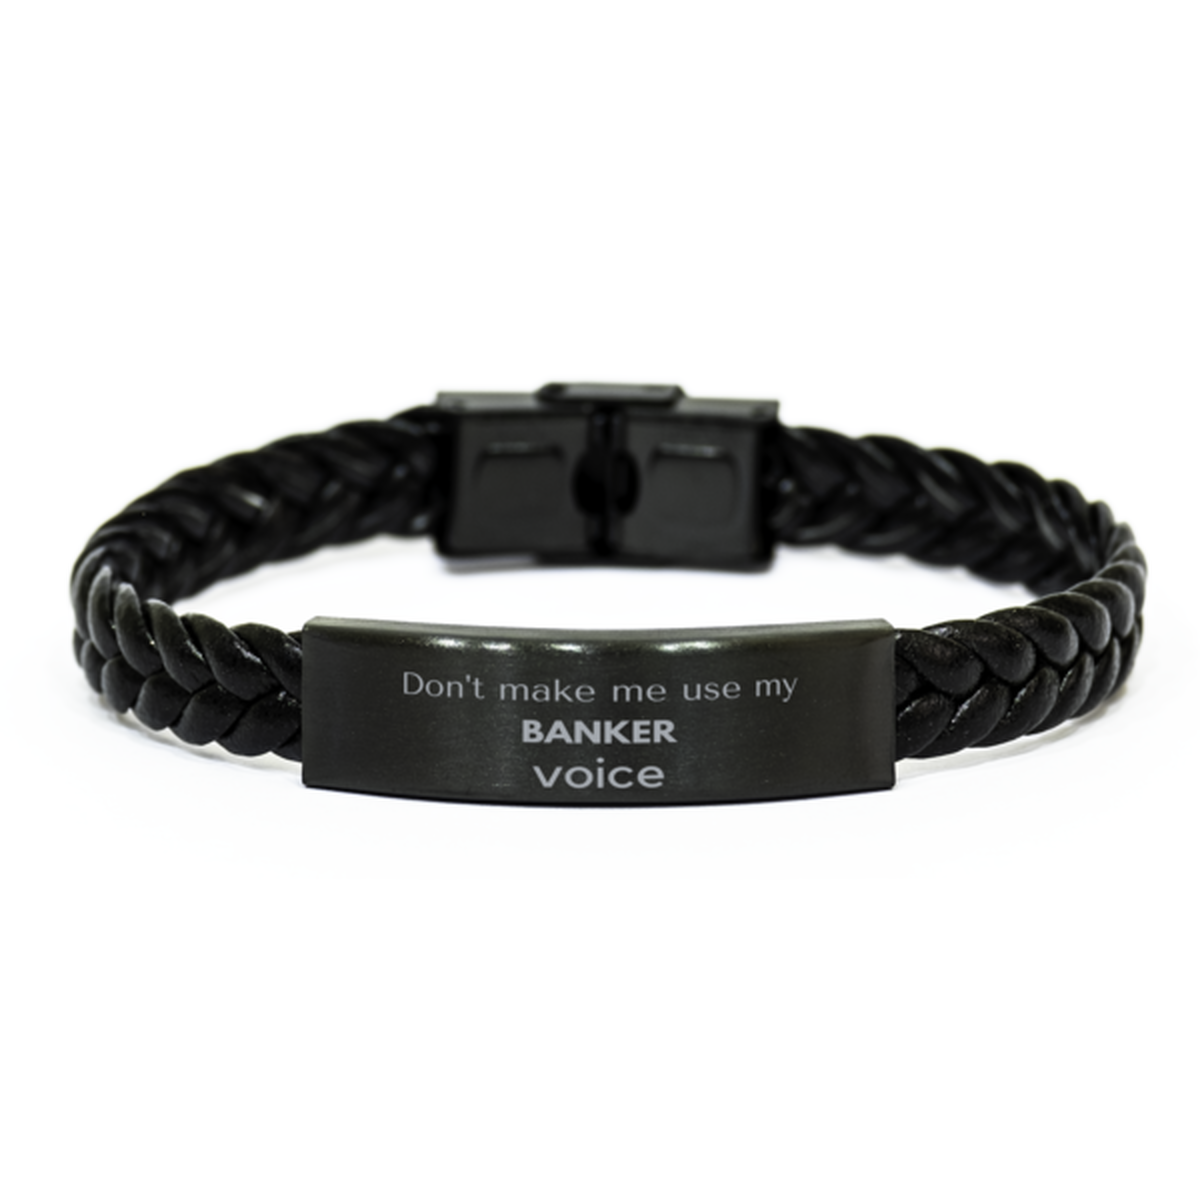 Don't make me use my Banker voice, Sarcasm Banker Gifts, Christmas Banker Braided Leather Bracelet Birthday Unique Gifts For Banker Coworkers, Men, Women, Colleague, Friends